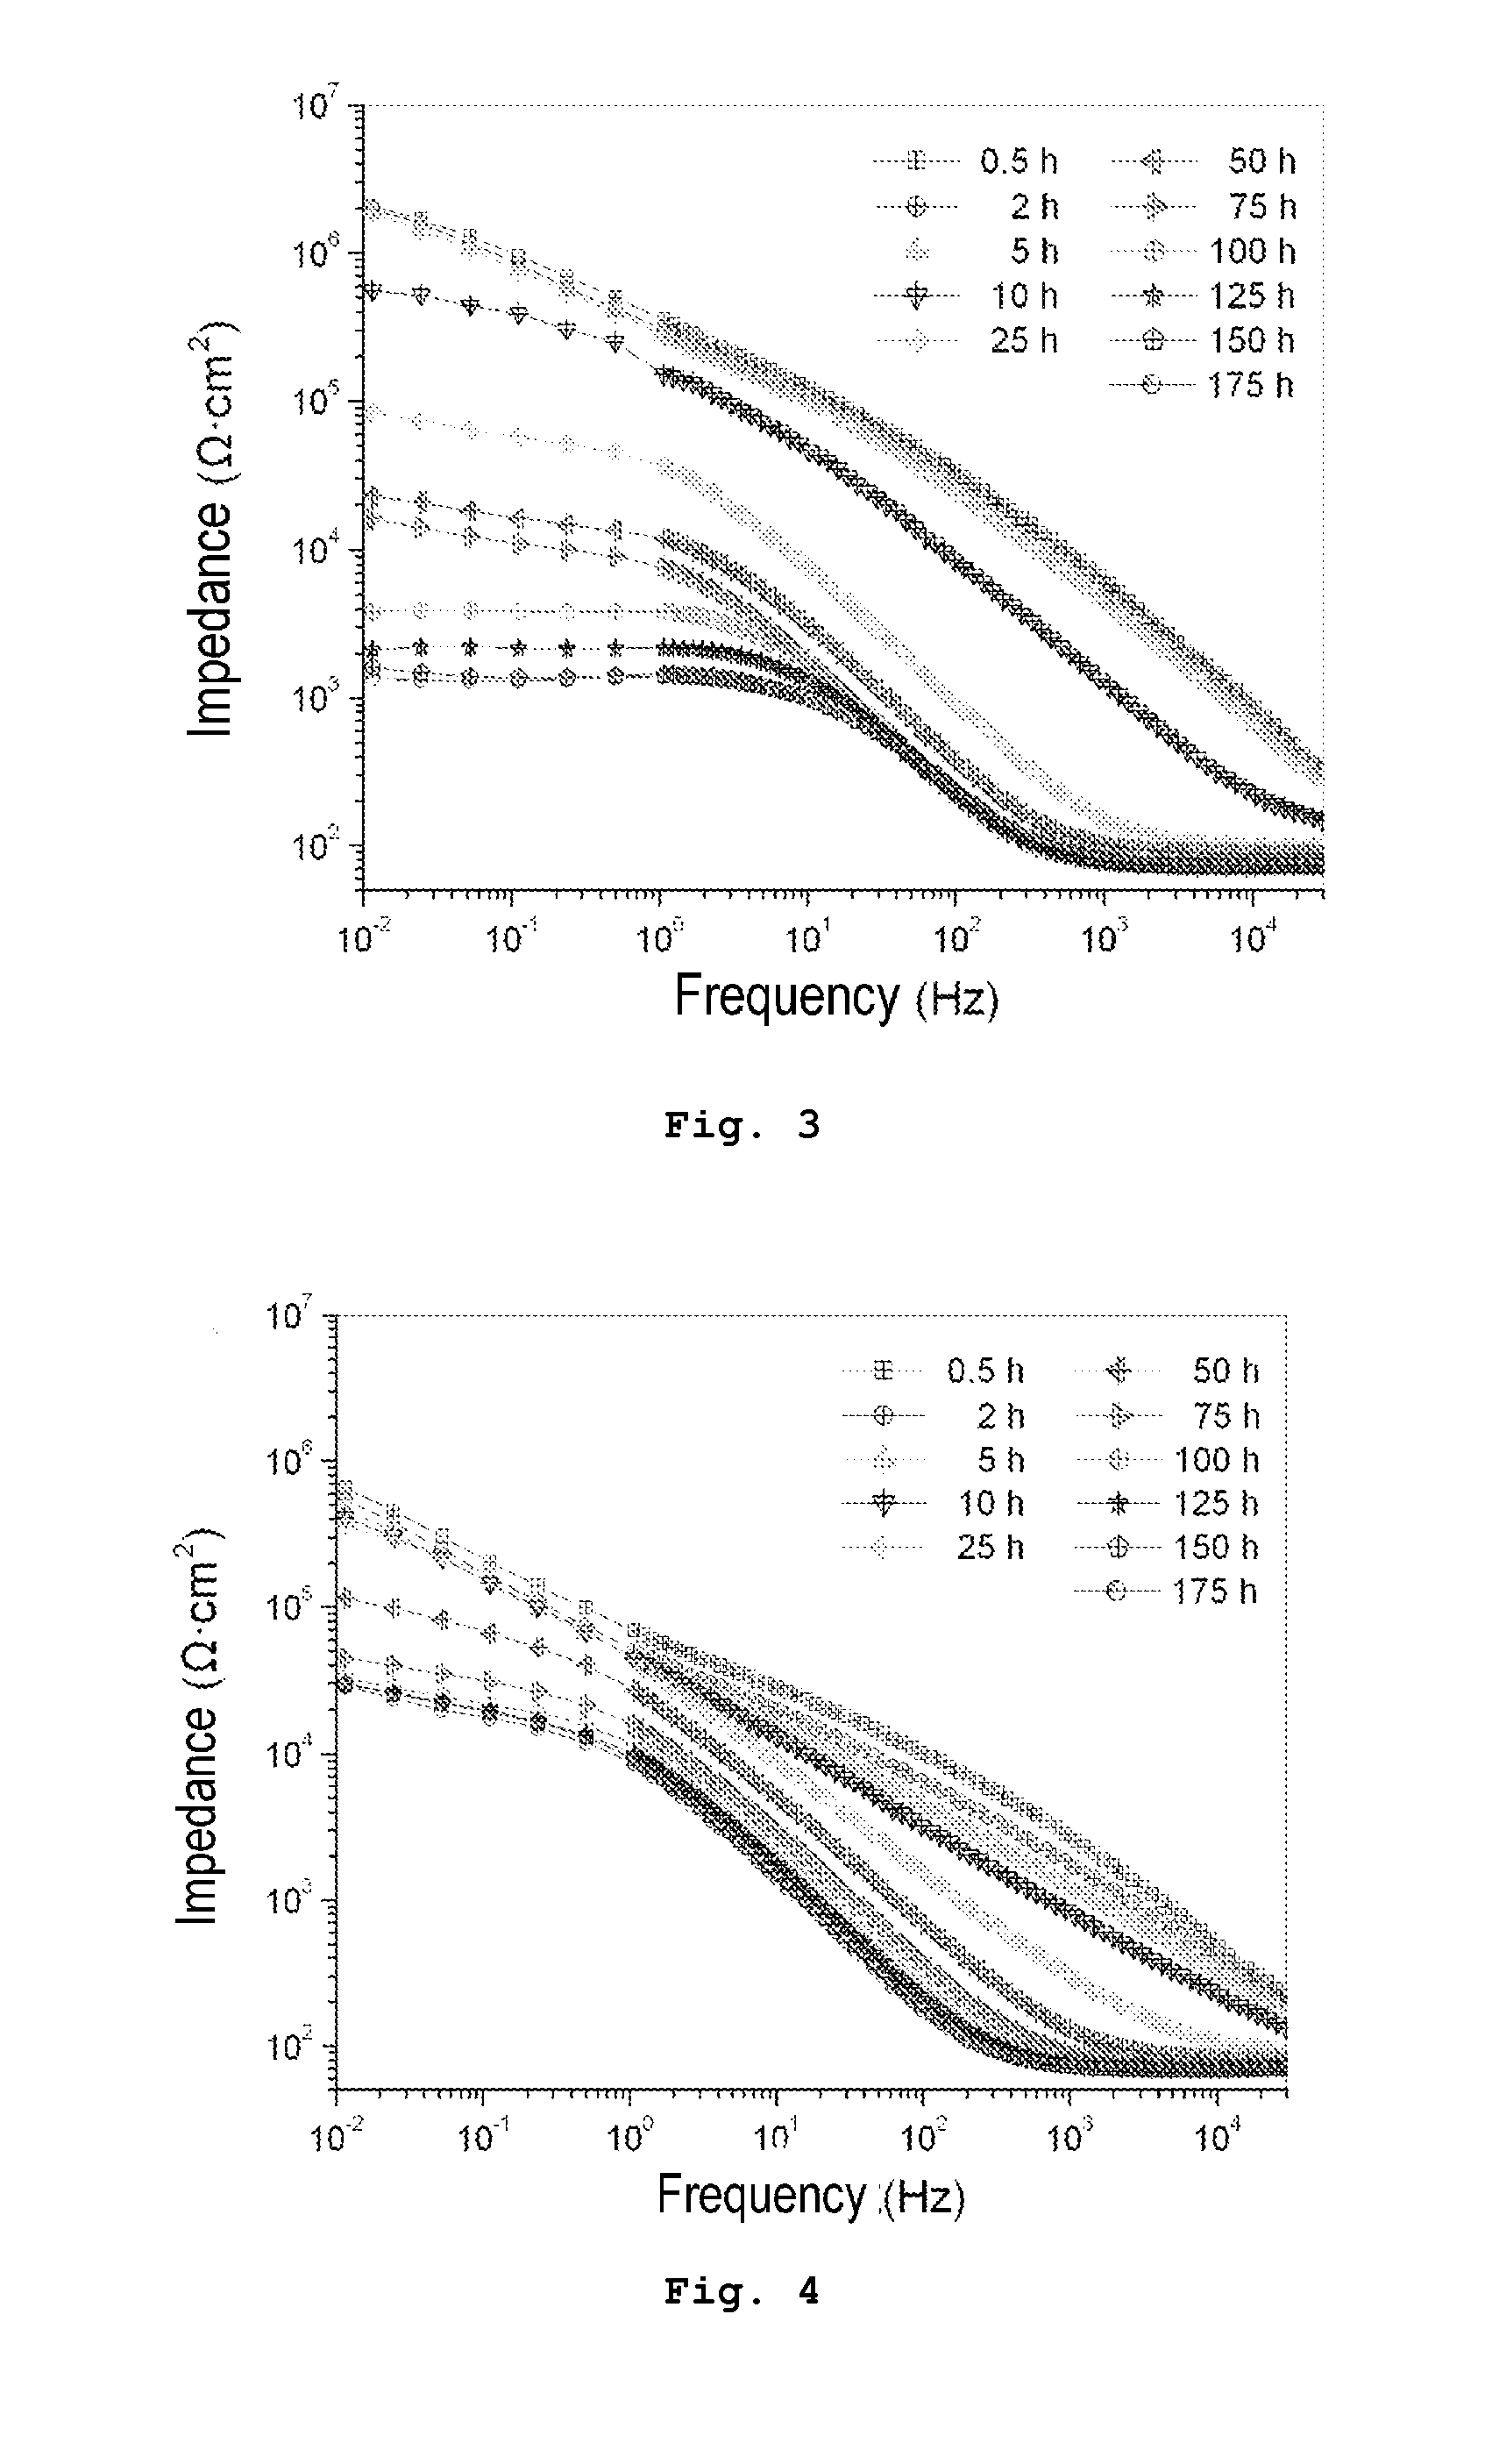 Process for Producing A Coating On The Surface Of A Substrate Based On Lightweight Metals By Plasma-electrolytic Oxidation